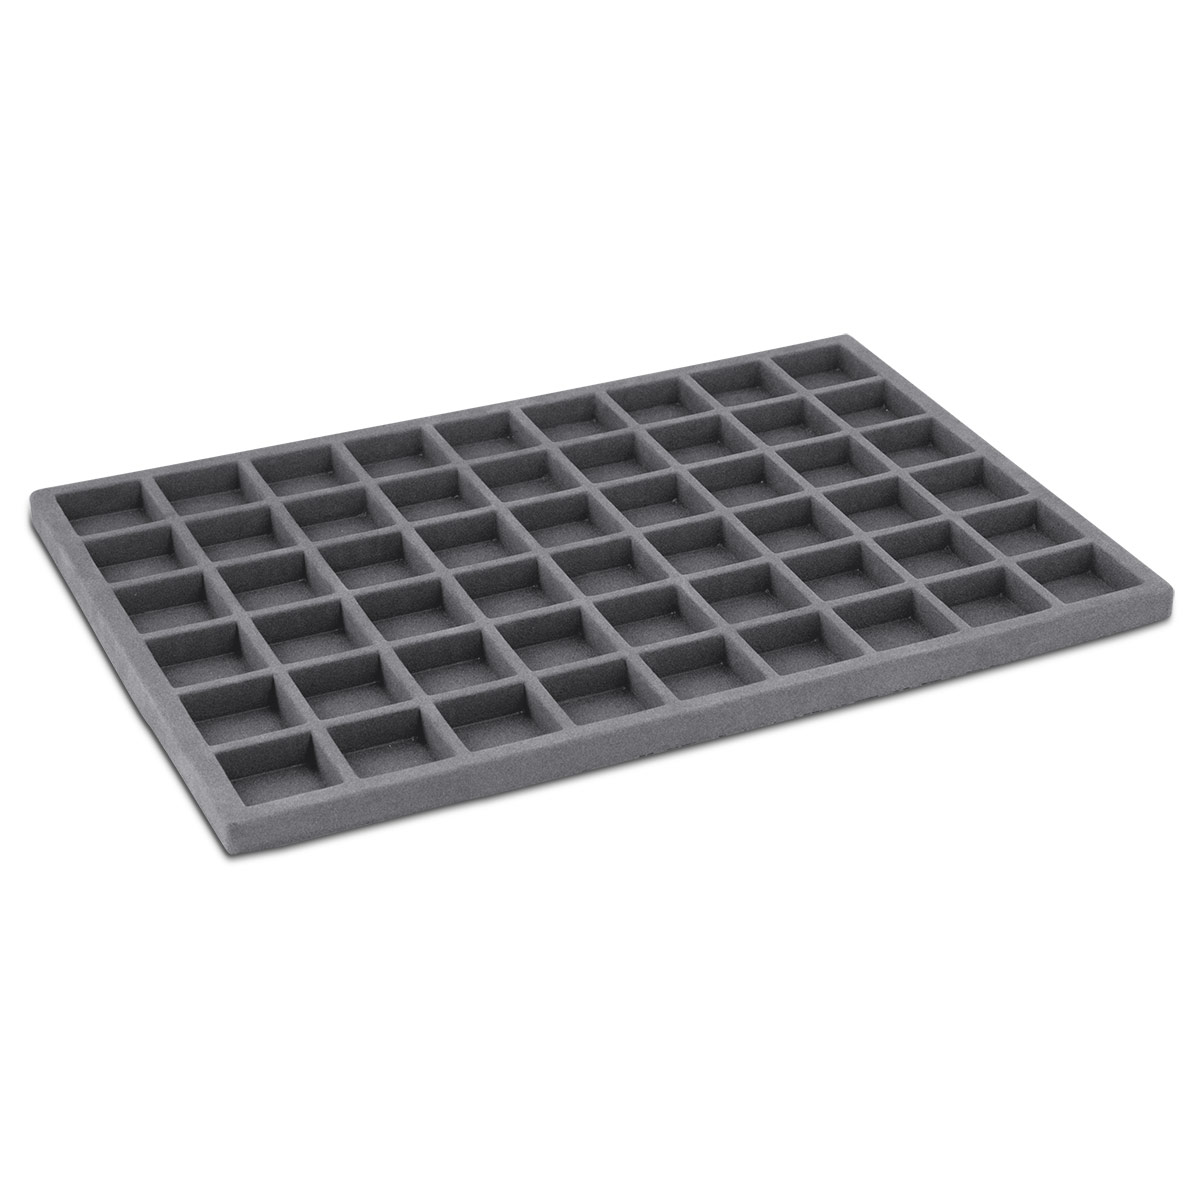 Inlay with 54 compartments, 40 x 40 mm, for tray N° 069002